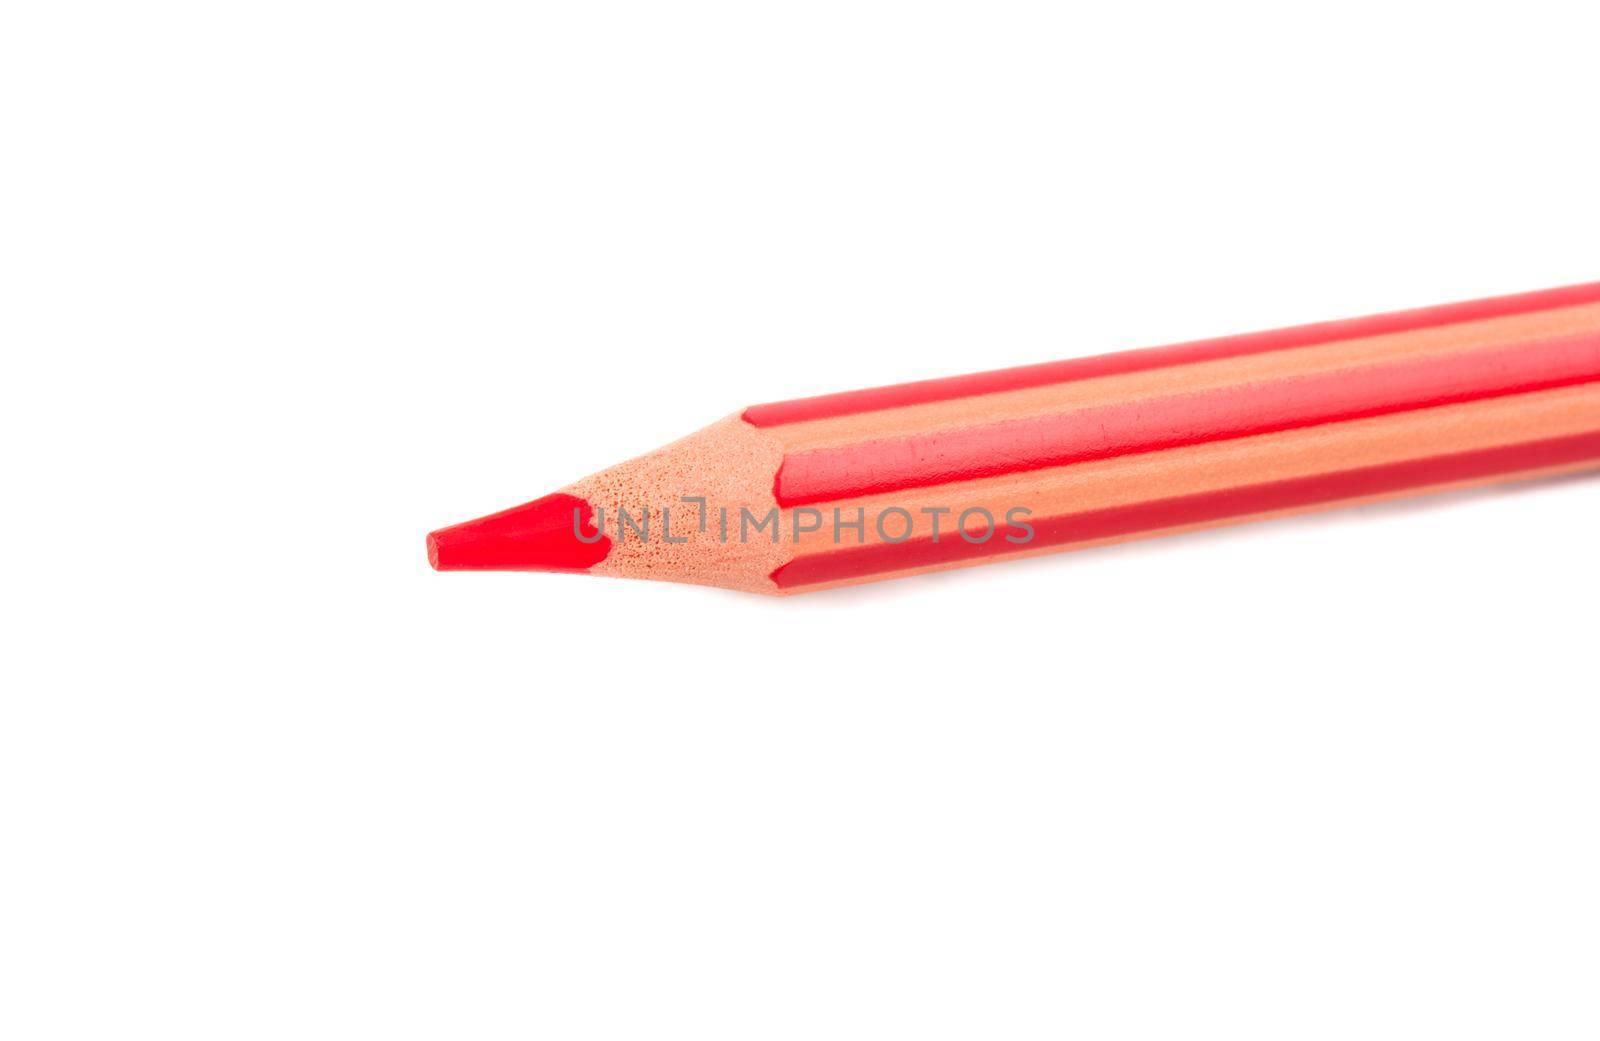 Red pencil close-up by andregric